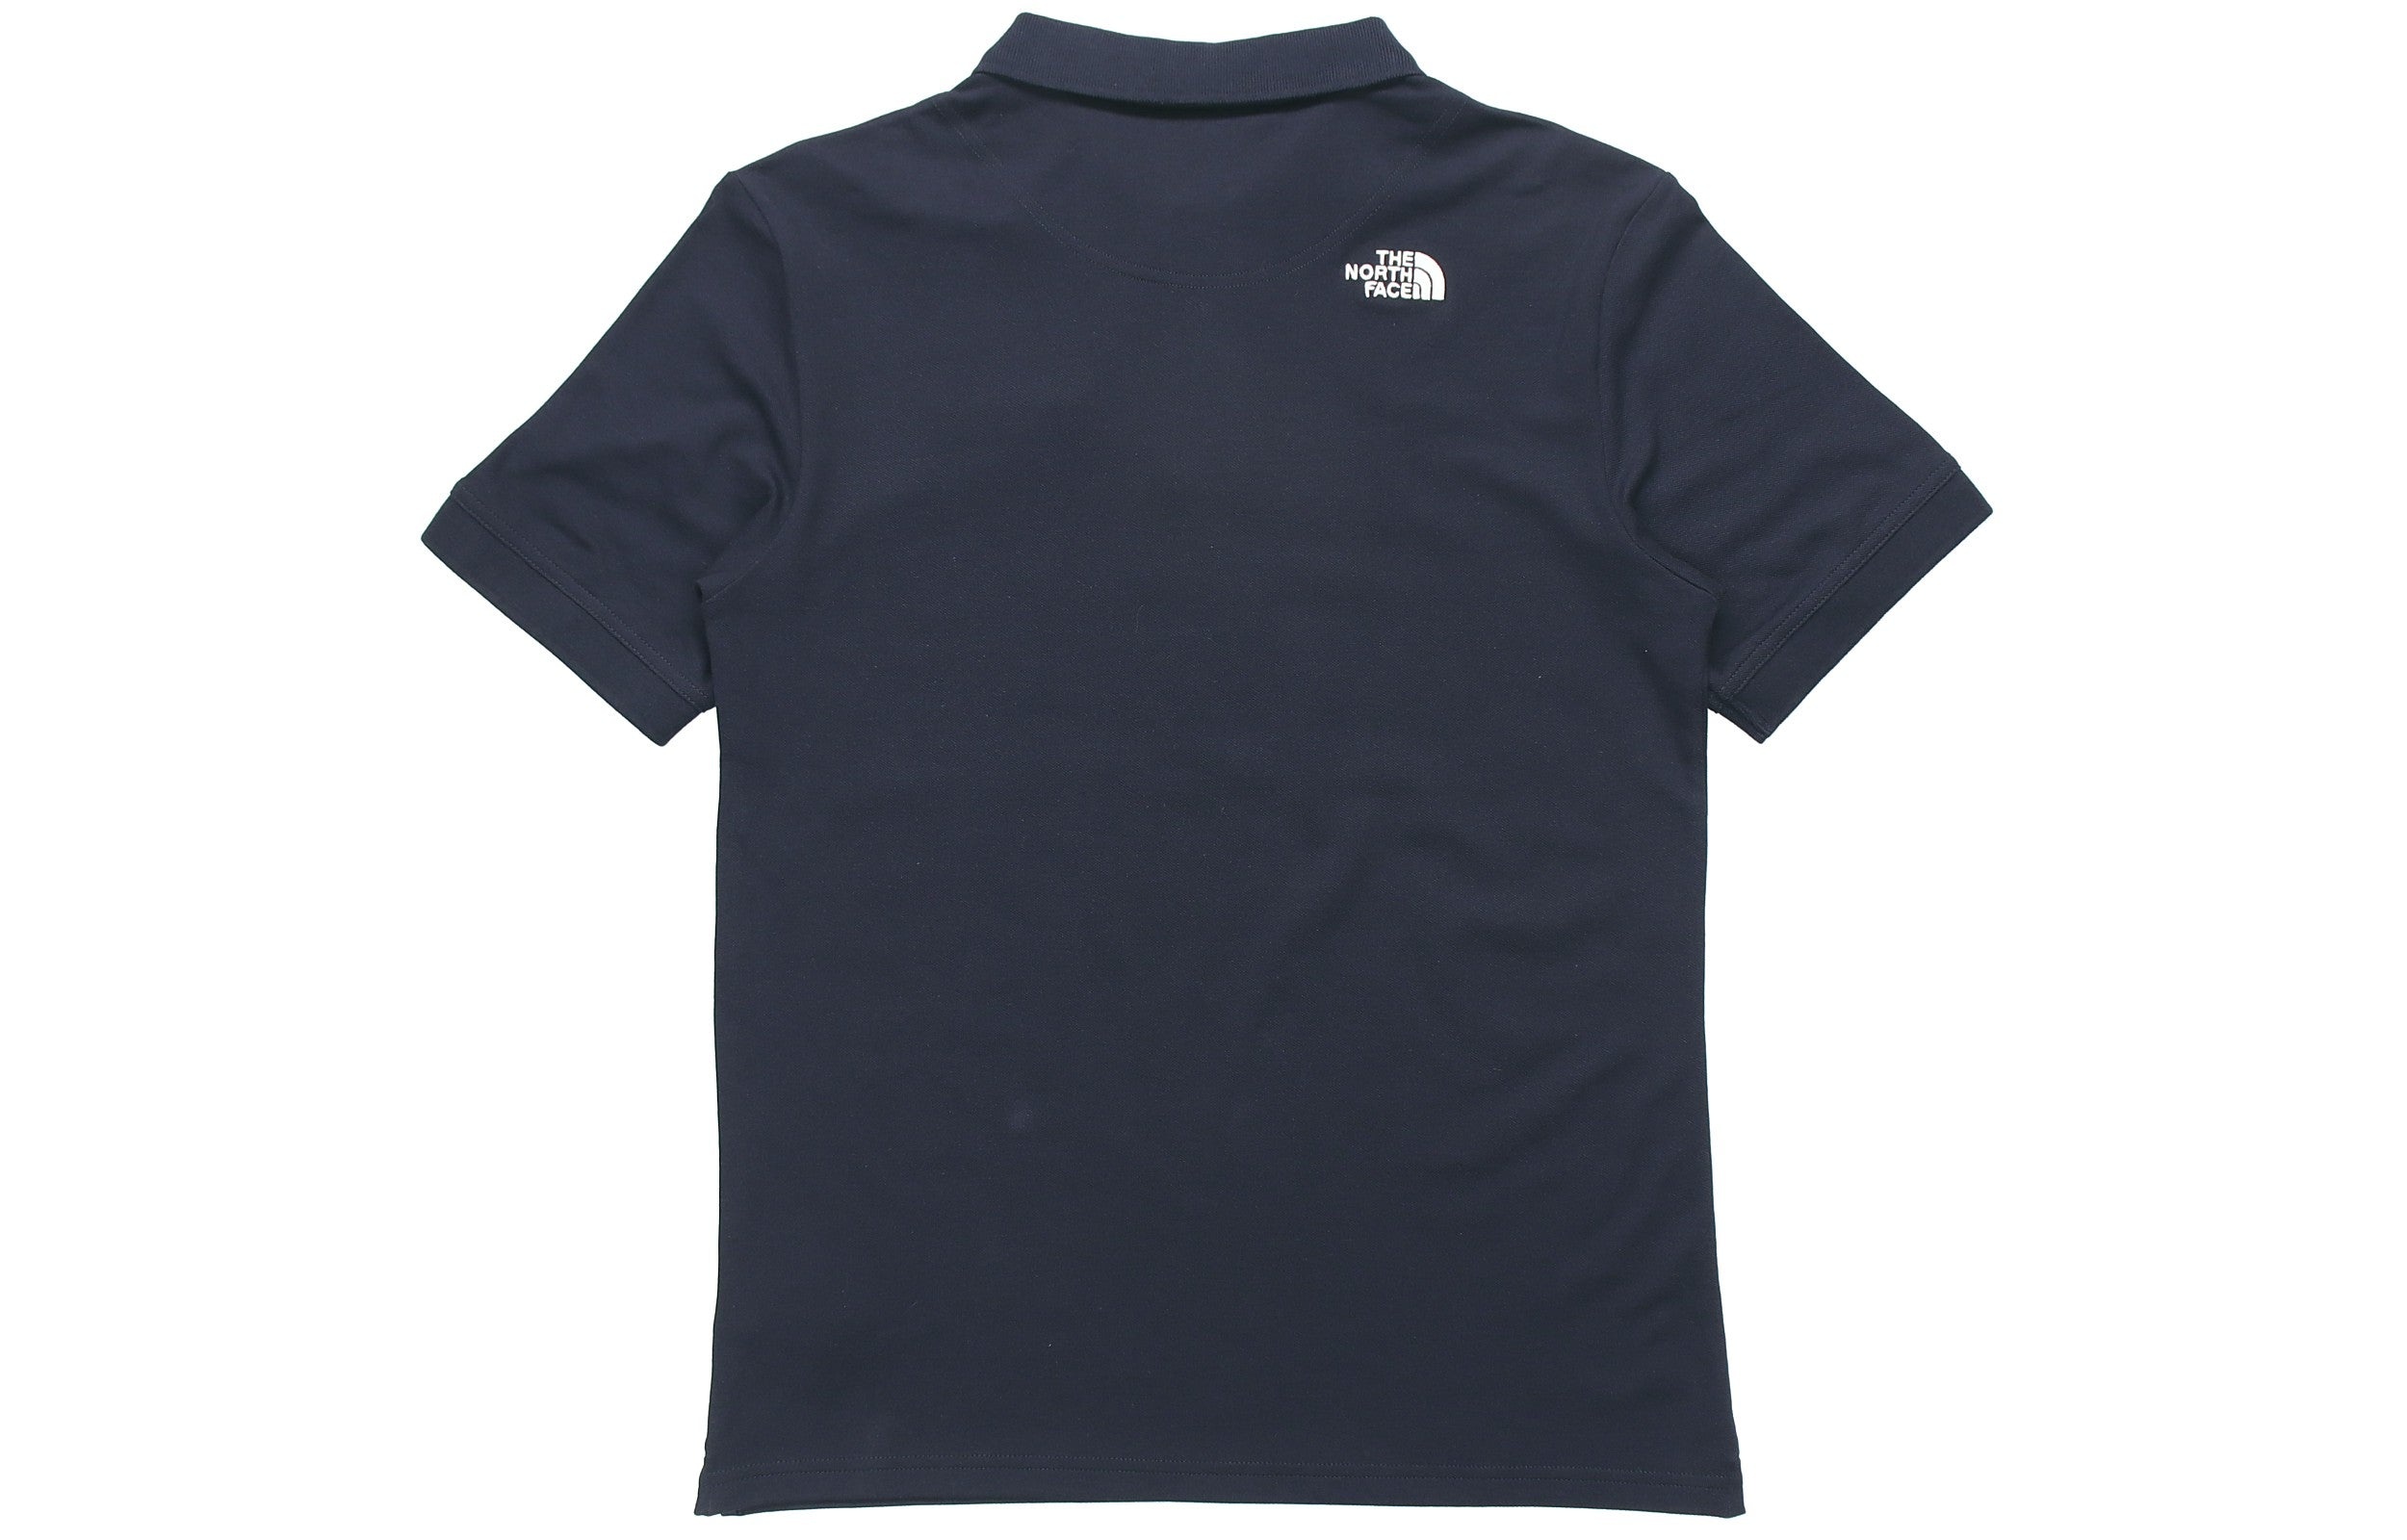 THE NORTH FACE Polo T-Shirts 'Navy' NF0A5B1O-RG1 - 2